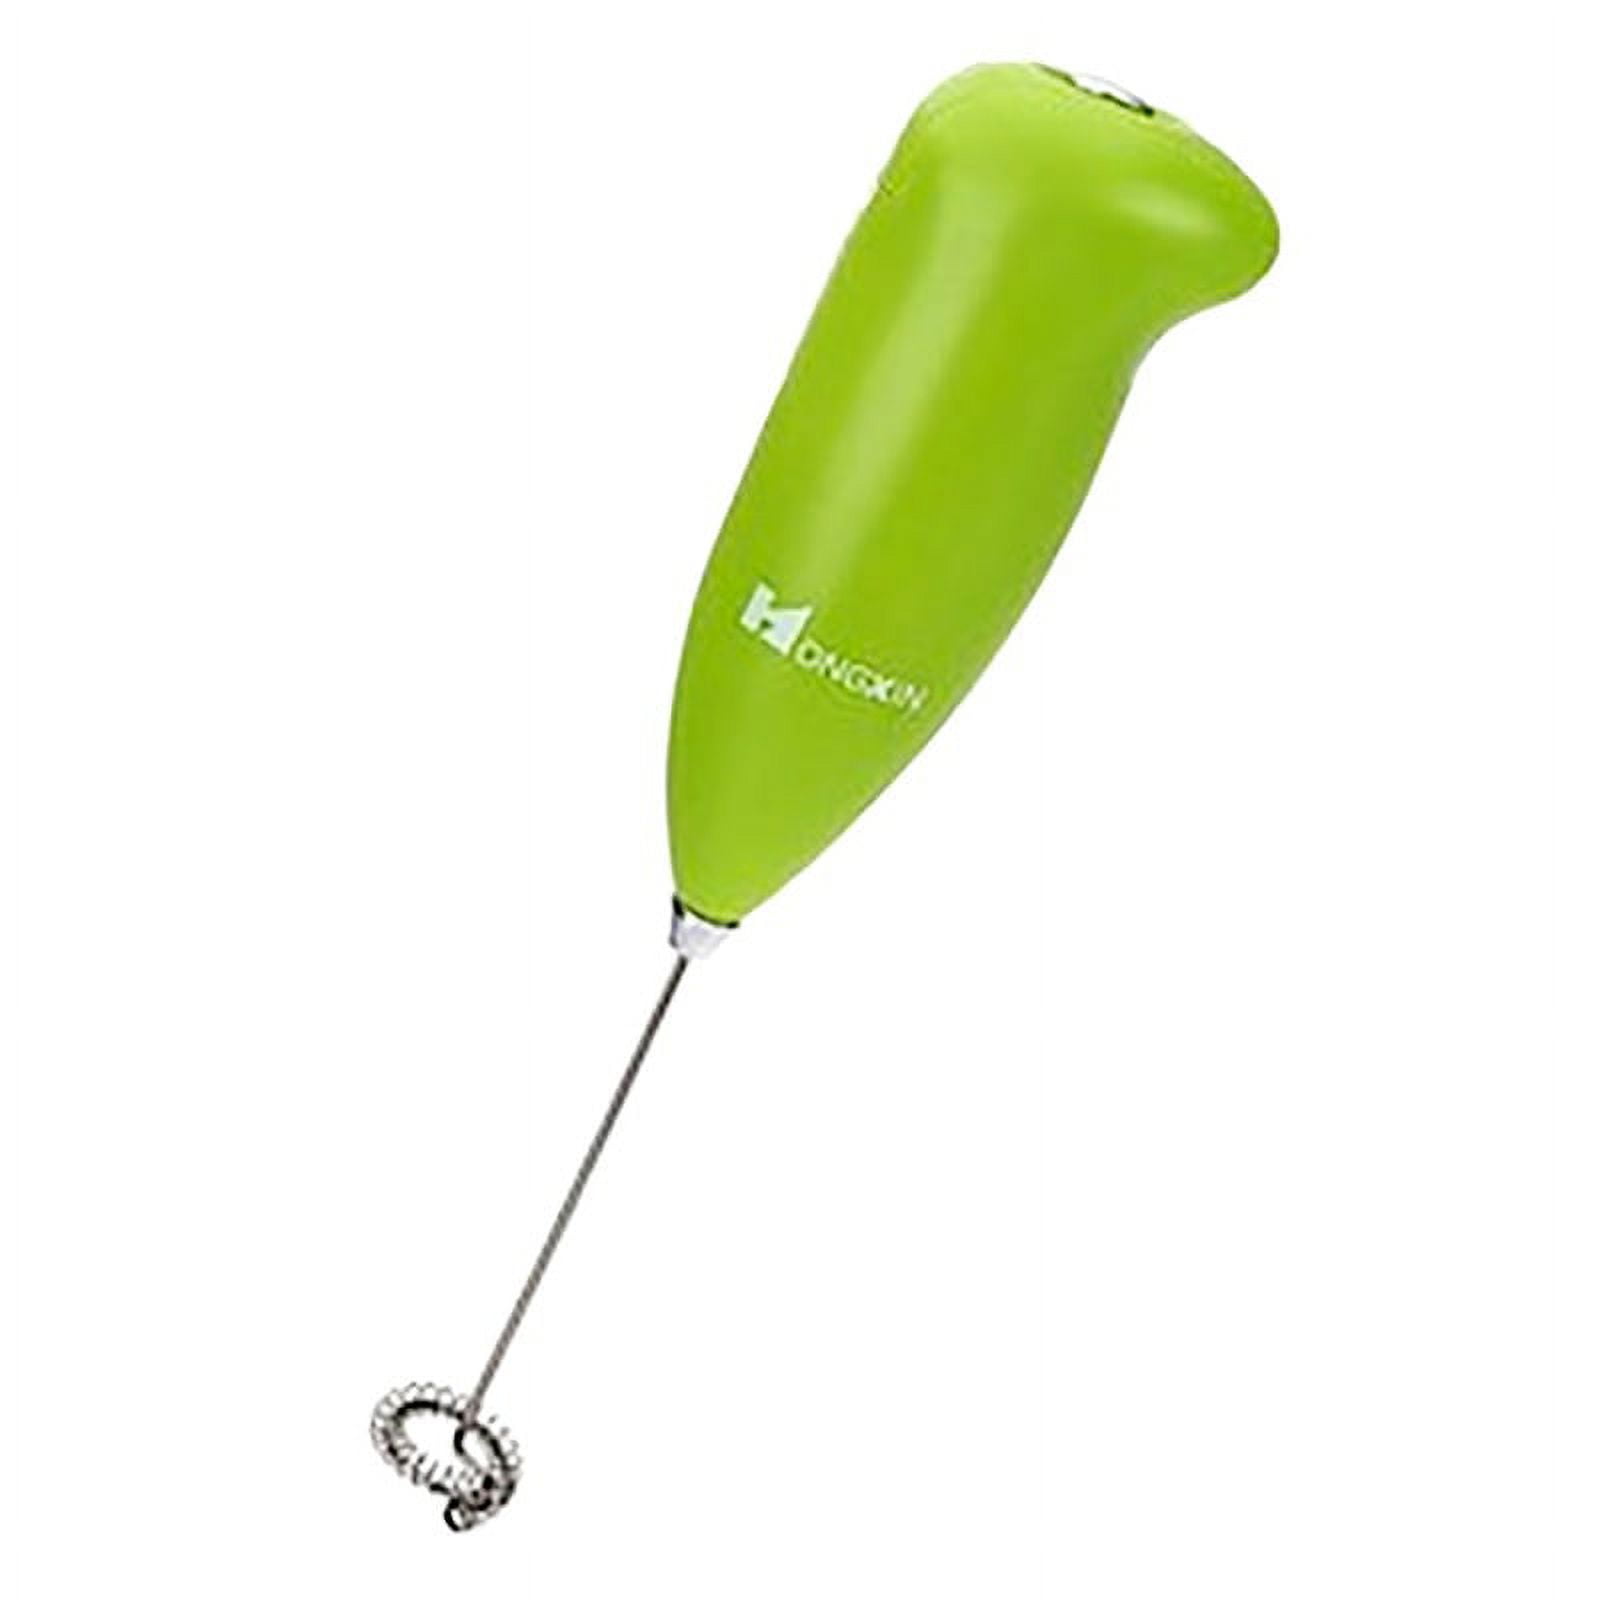 TINKER Milk Frother with Stand Coffee Frother Electric Drink Mixer Handheld  Milk Foamer Matcha Whisk Mini Blender Coffee Stirrers